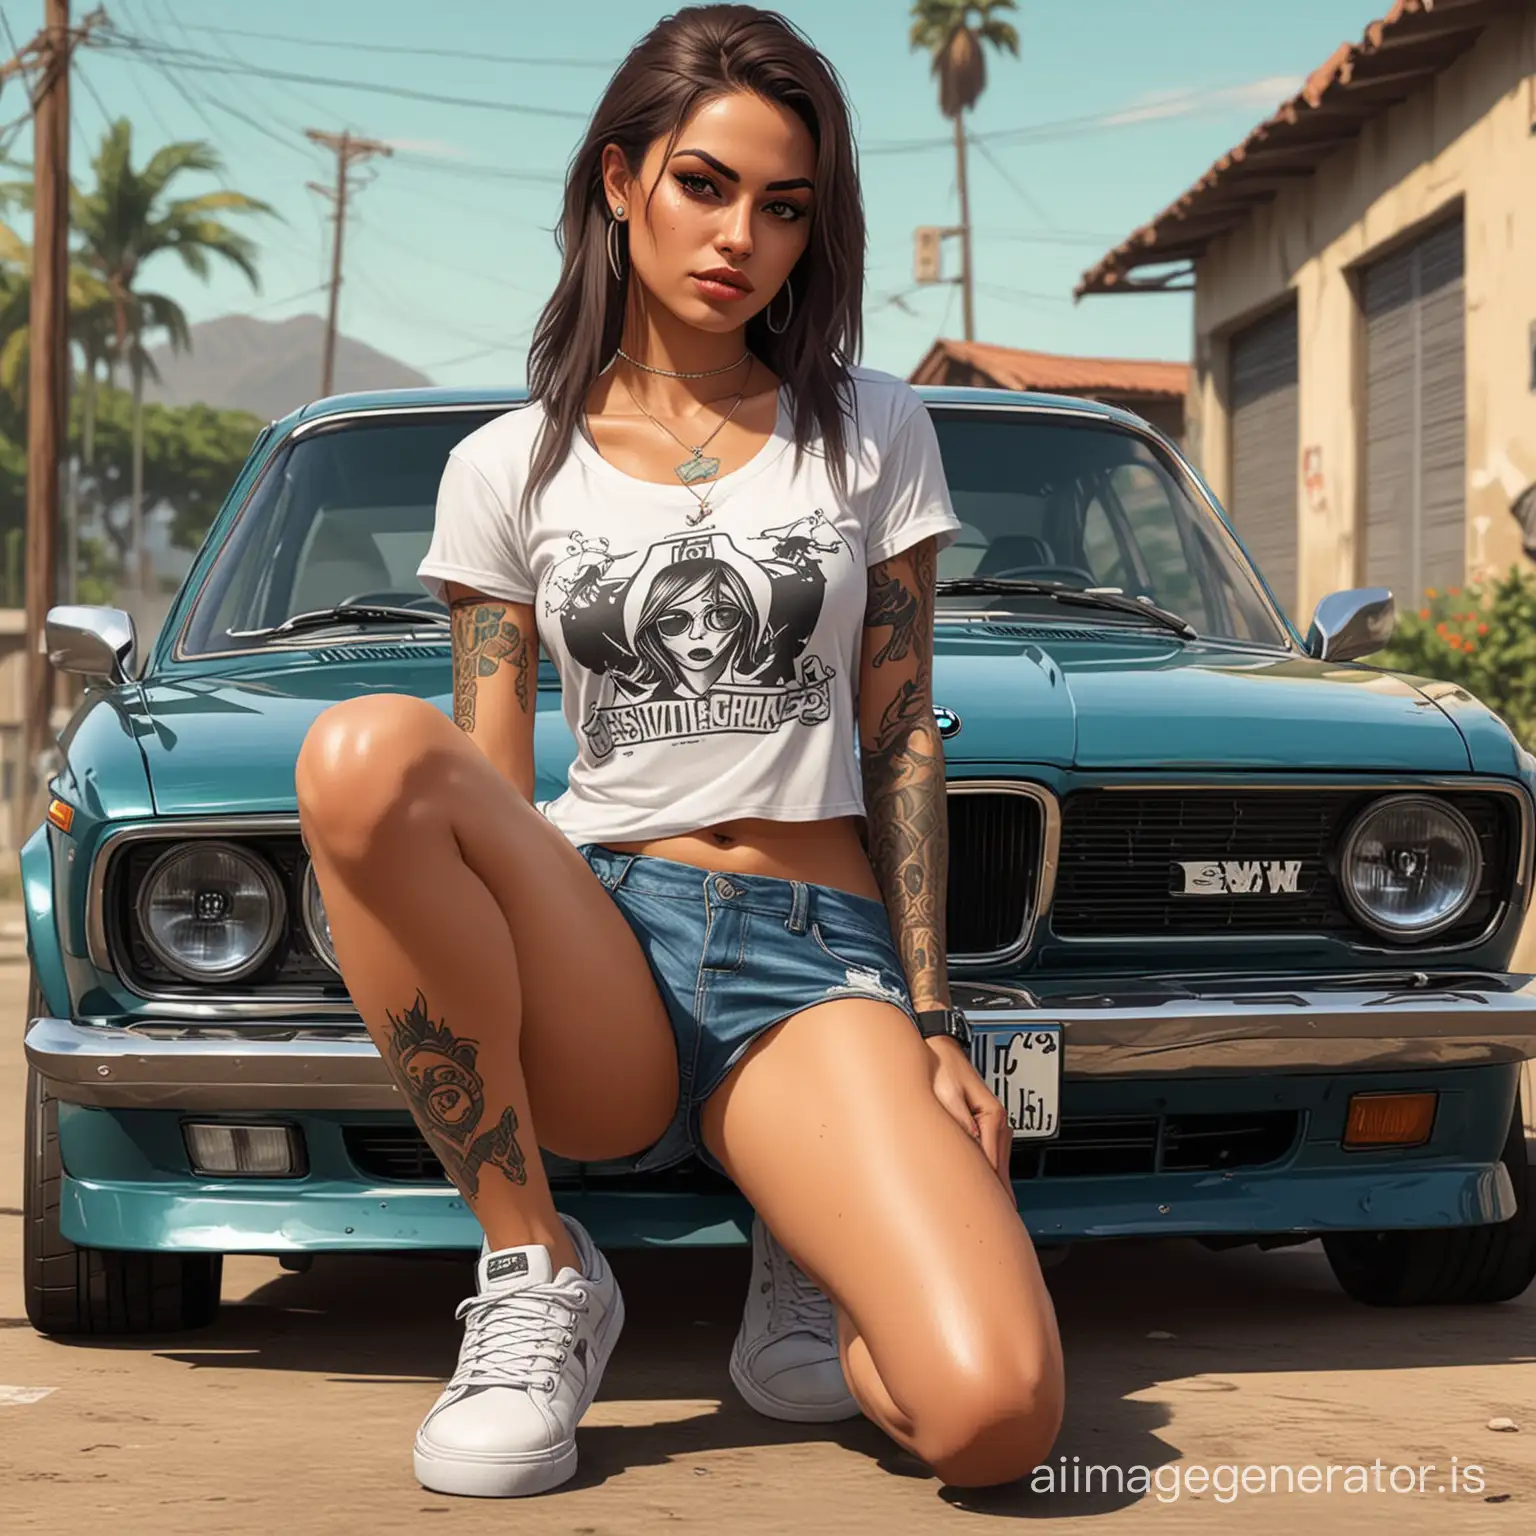 Brazilian style gta san andreas cartoon art drawing with modern 2019 BMW car, girl with shorts, tattoos and white sneakers and sexy Brazil shirt crouched in front with a pistol